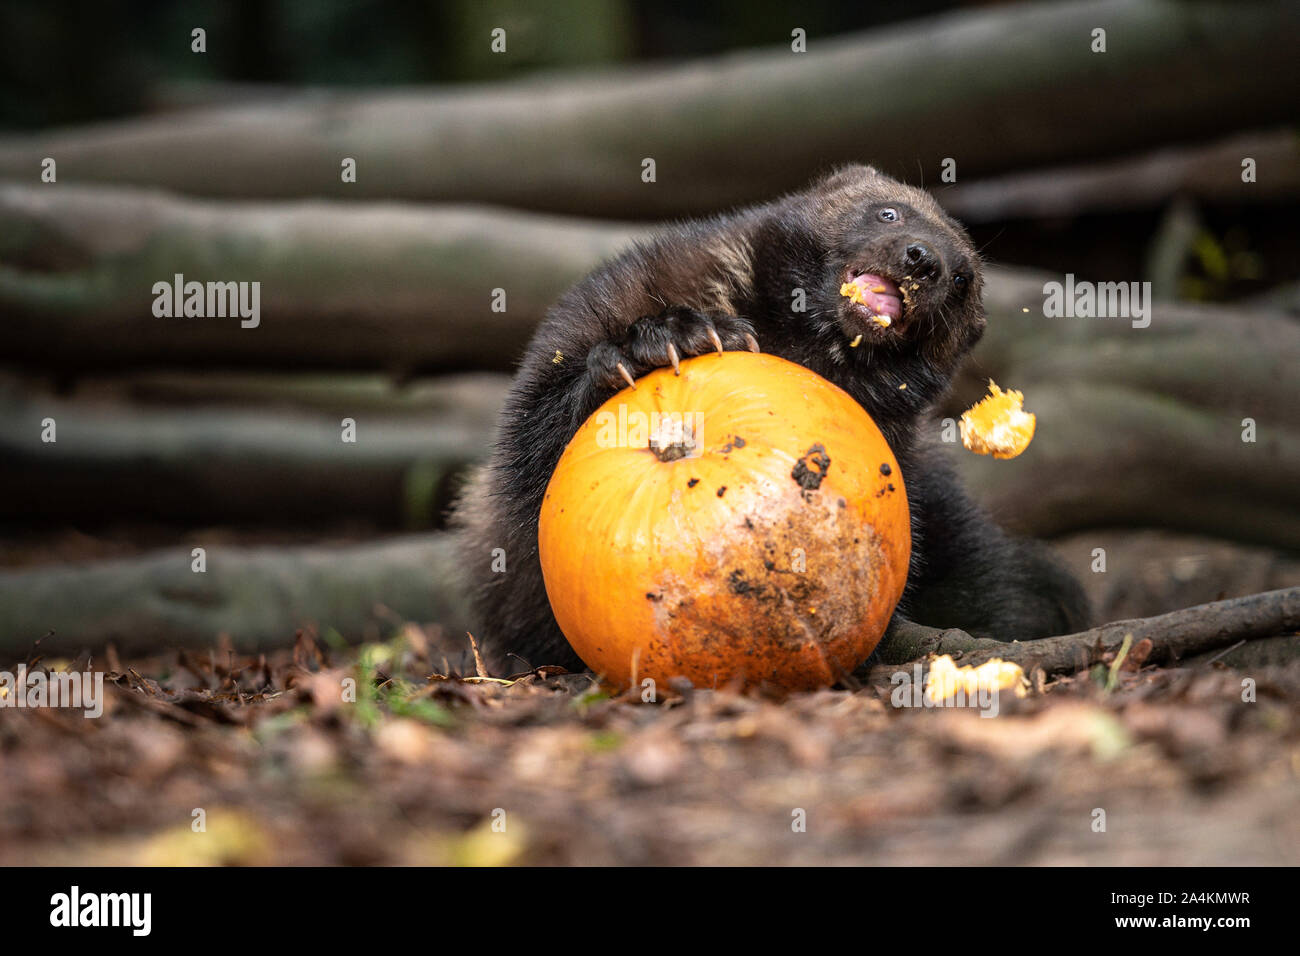 Cotswold Wildlife Park, Oxfordshire, UK. 15th Oct, 2019. Animals eat pumpkins carved with various designs, from spooky faces to impressions of the animals themselves. Sharapova the wolverine. Credit: Andrew Walmsley/Alamy Live News Stock Photo